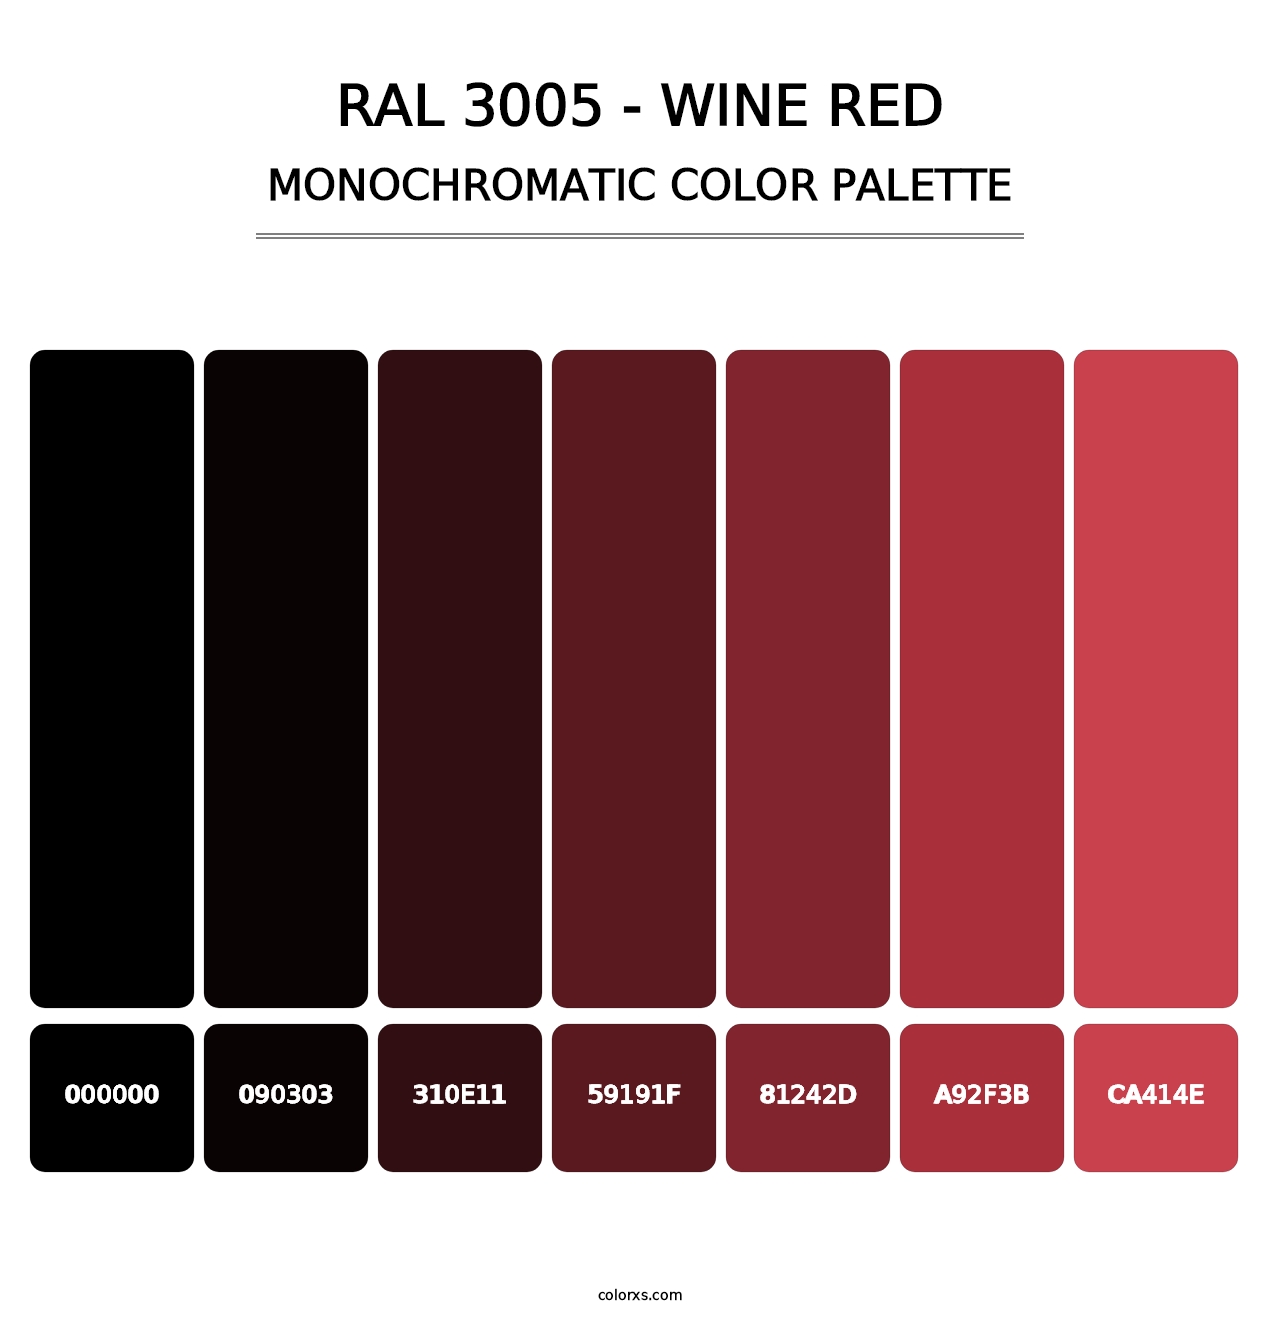 RAL 3005 - Wine Red - Monochromatic Color Palette